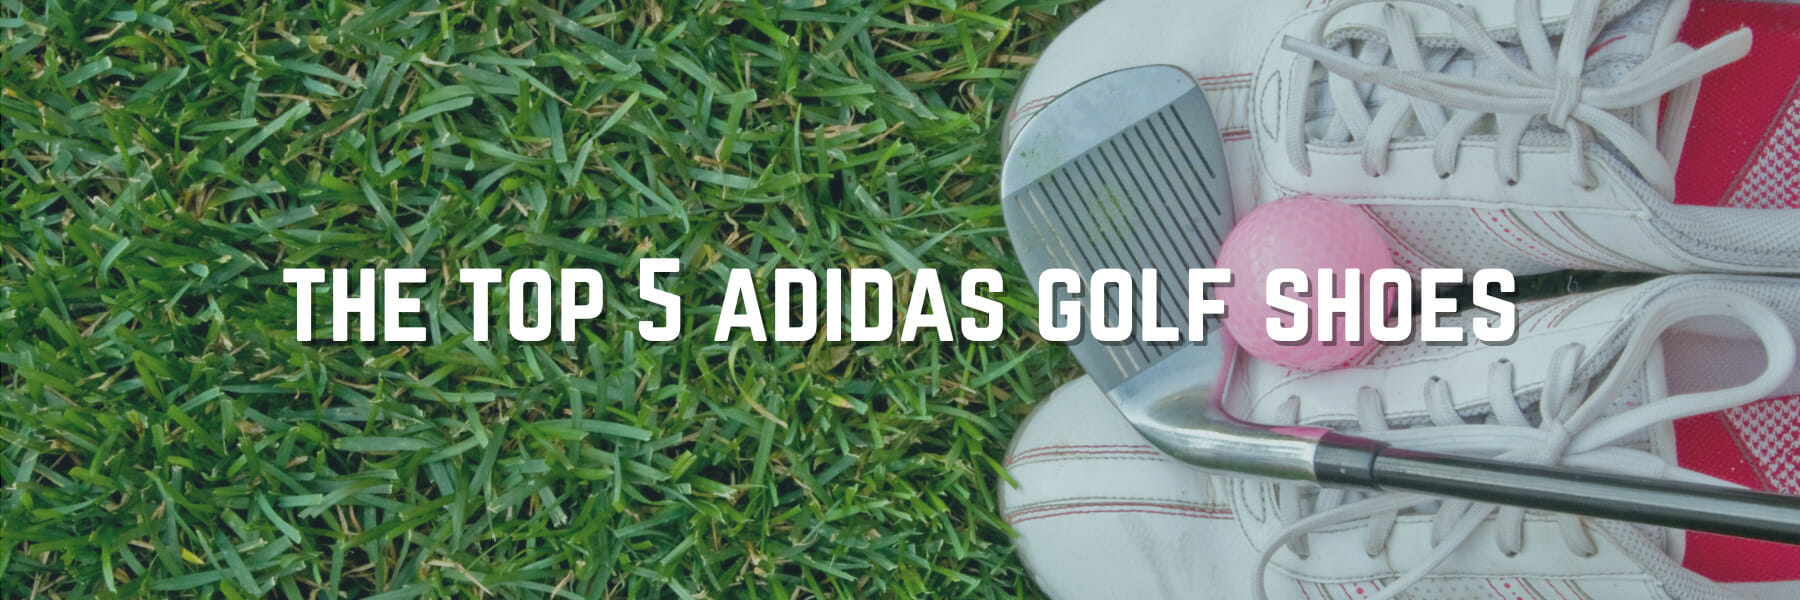 The Best Adidas Golf Shoes You Must Own For Men